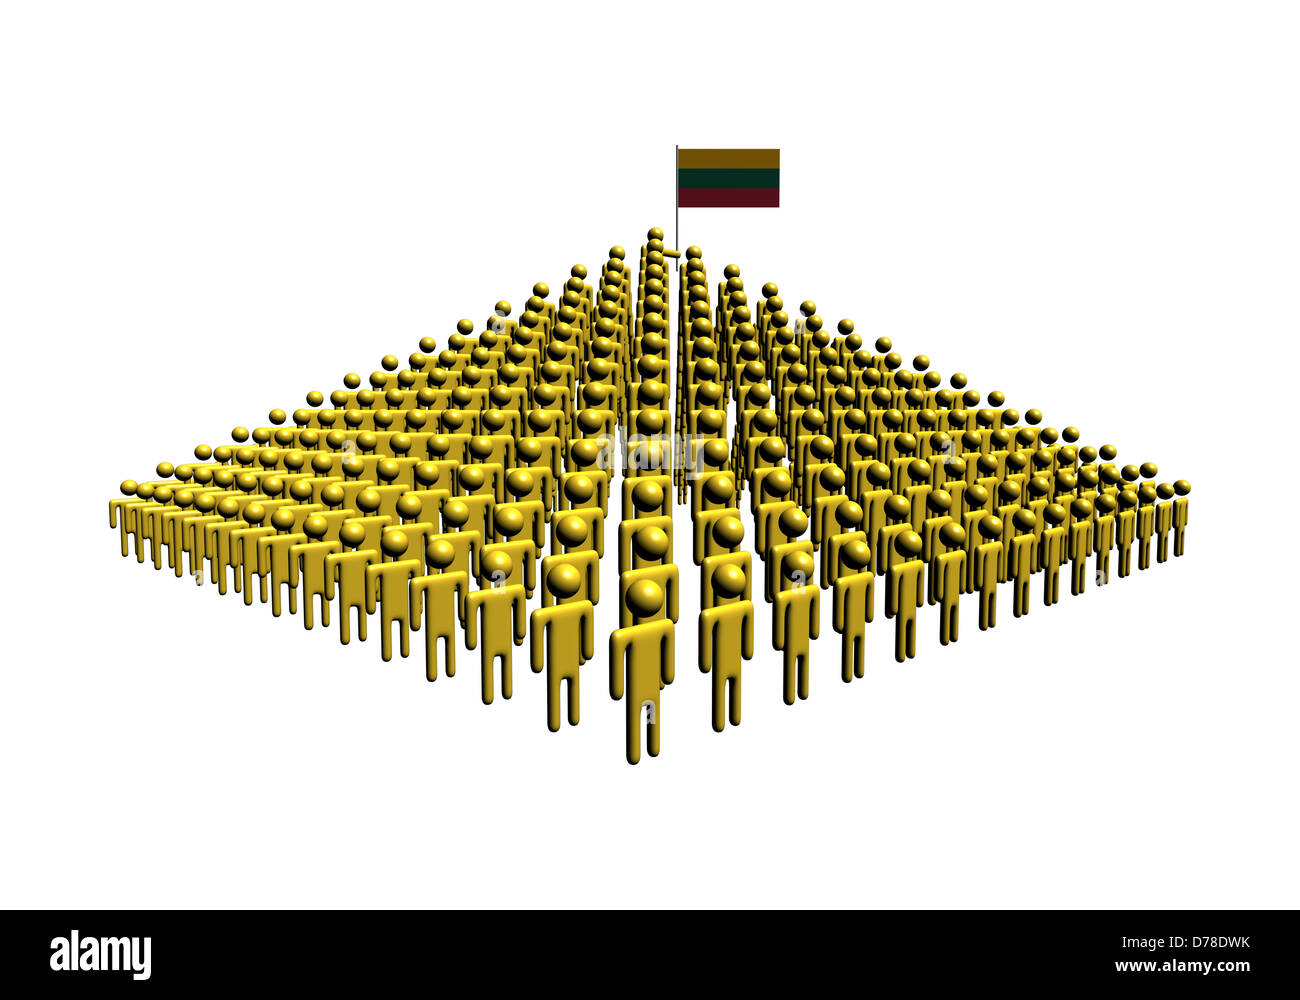 Pyramid of abstract people with Lithuania flag illustration Stock Photo